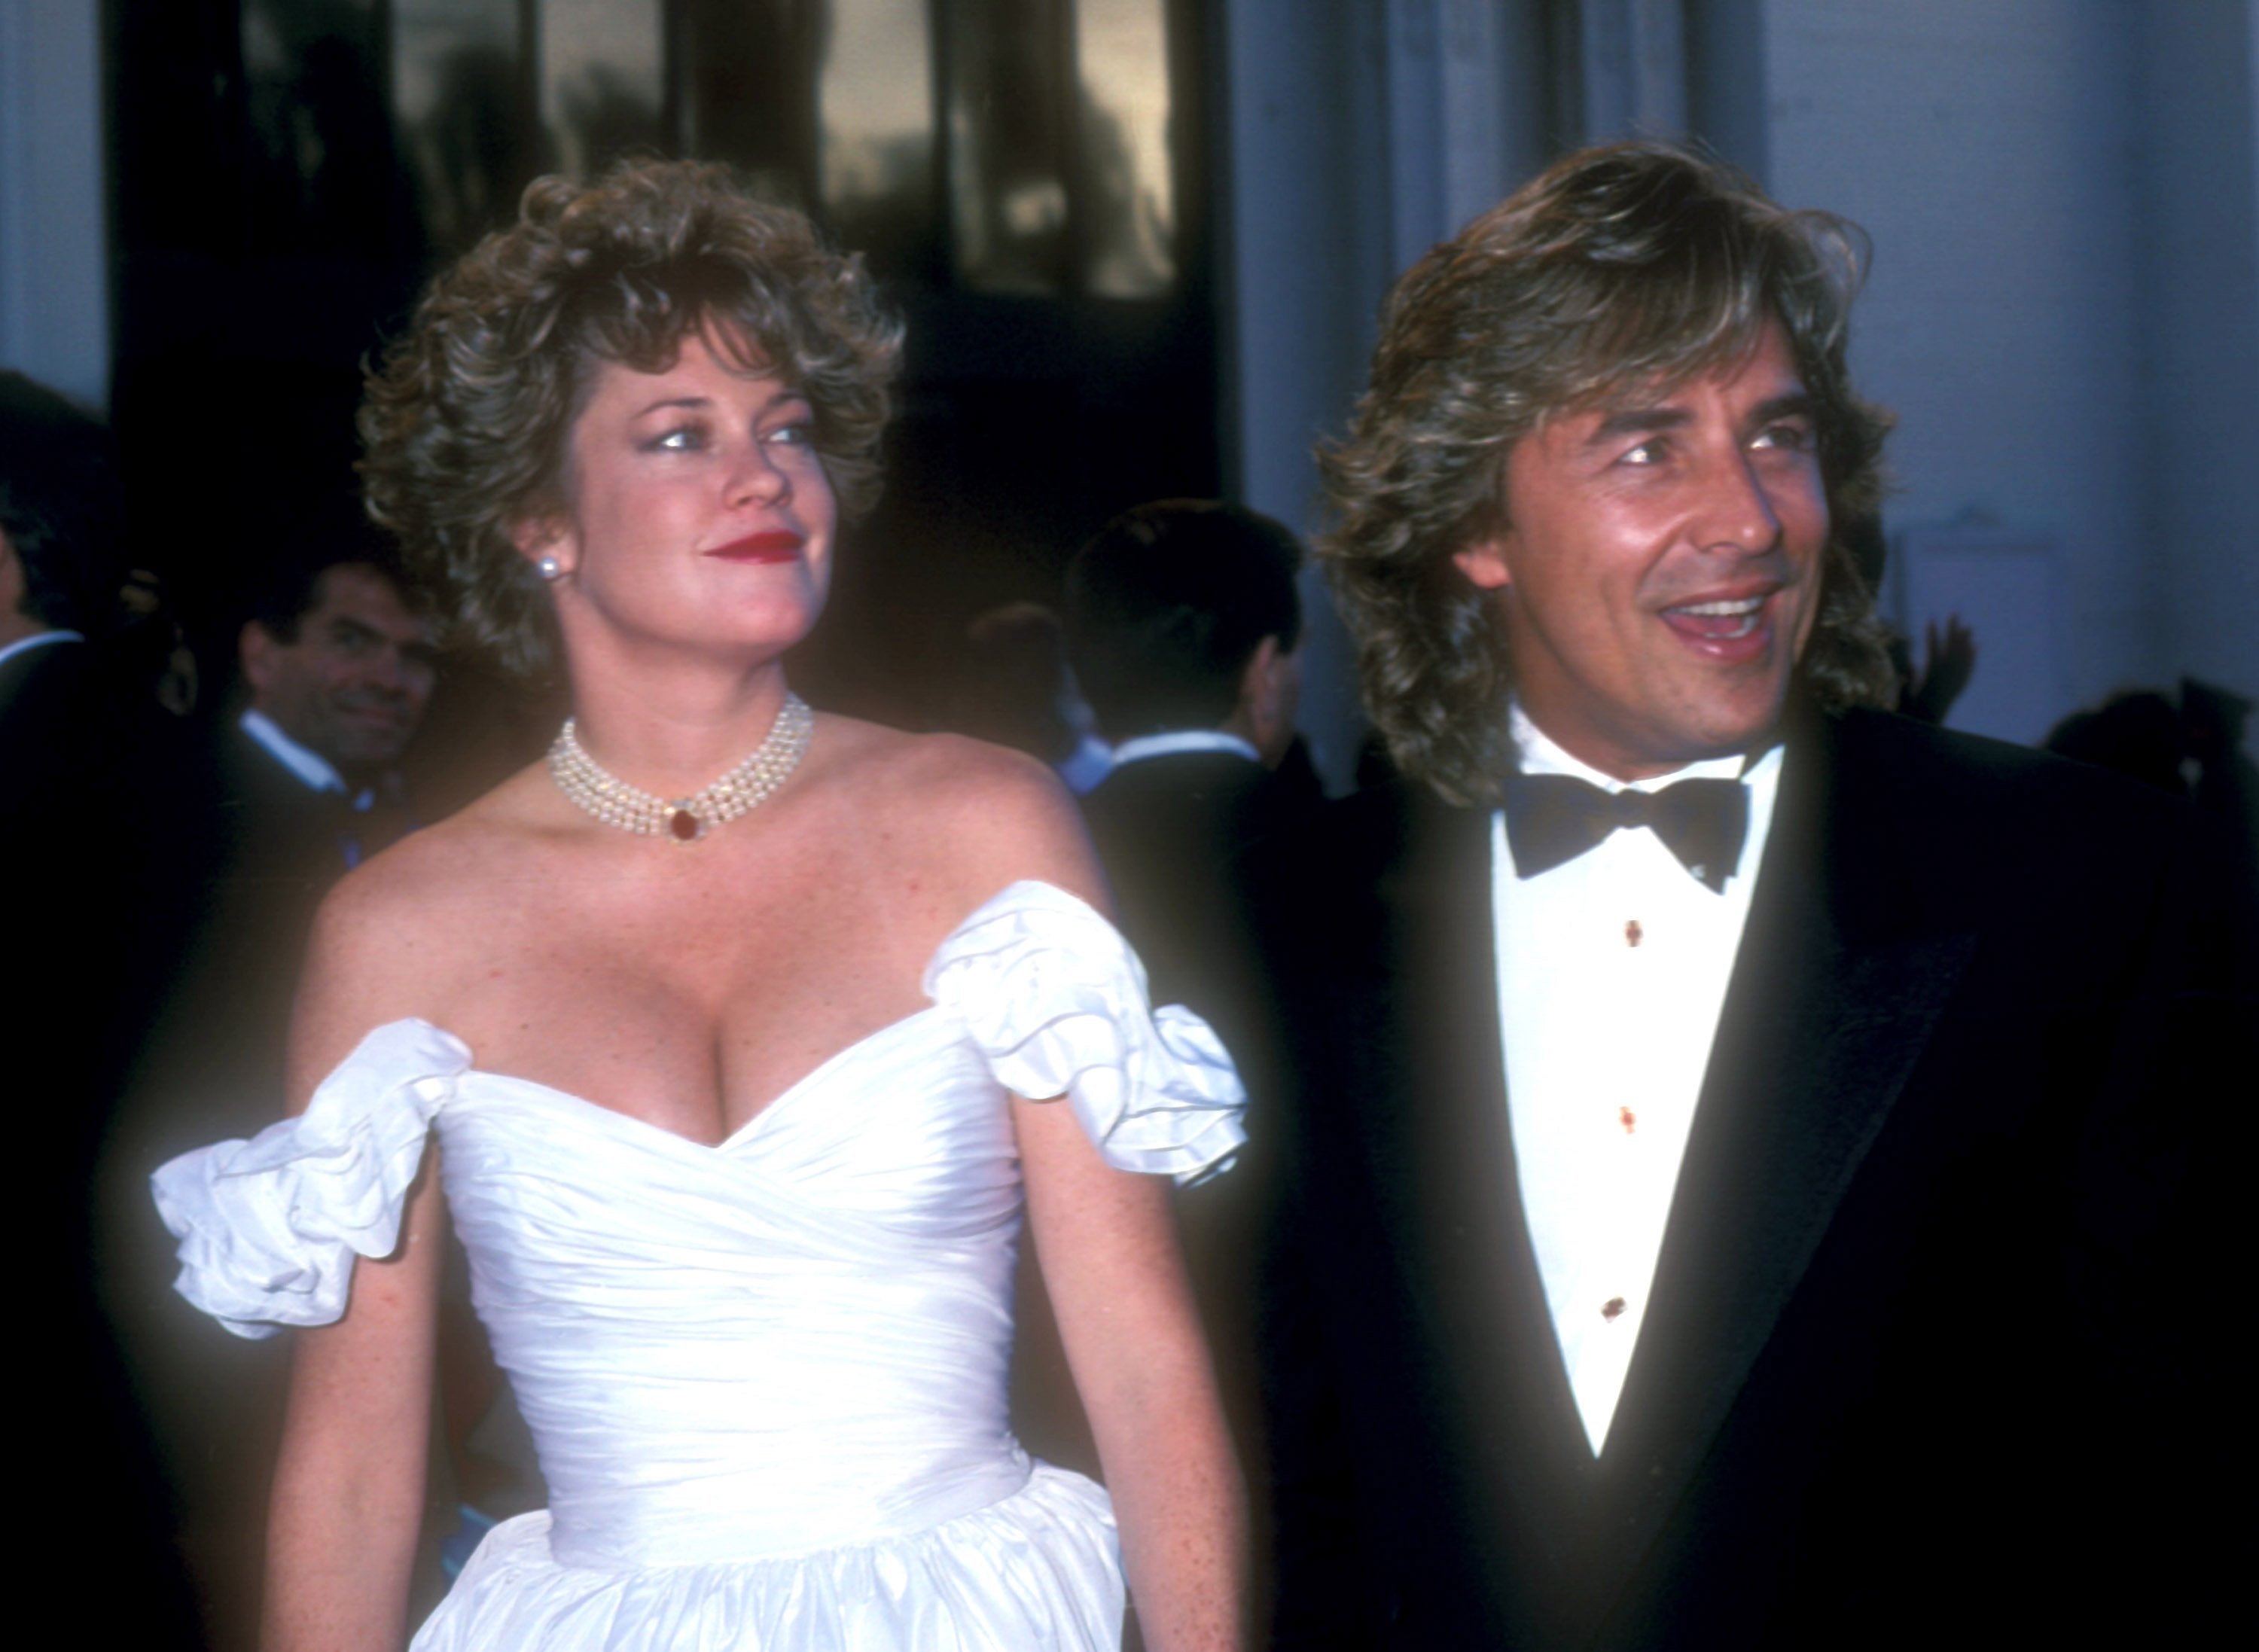 Melanie Griffith and Don Johnson during 61st Annual Academy Awards - Arrivals at Shrine Auditorium in Los Angeles, California, United States. | Source: Getty Images